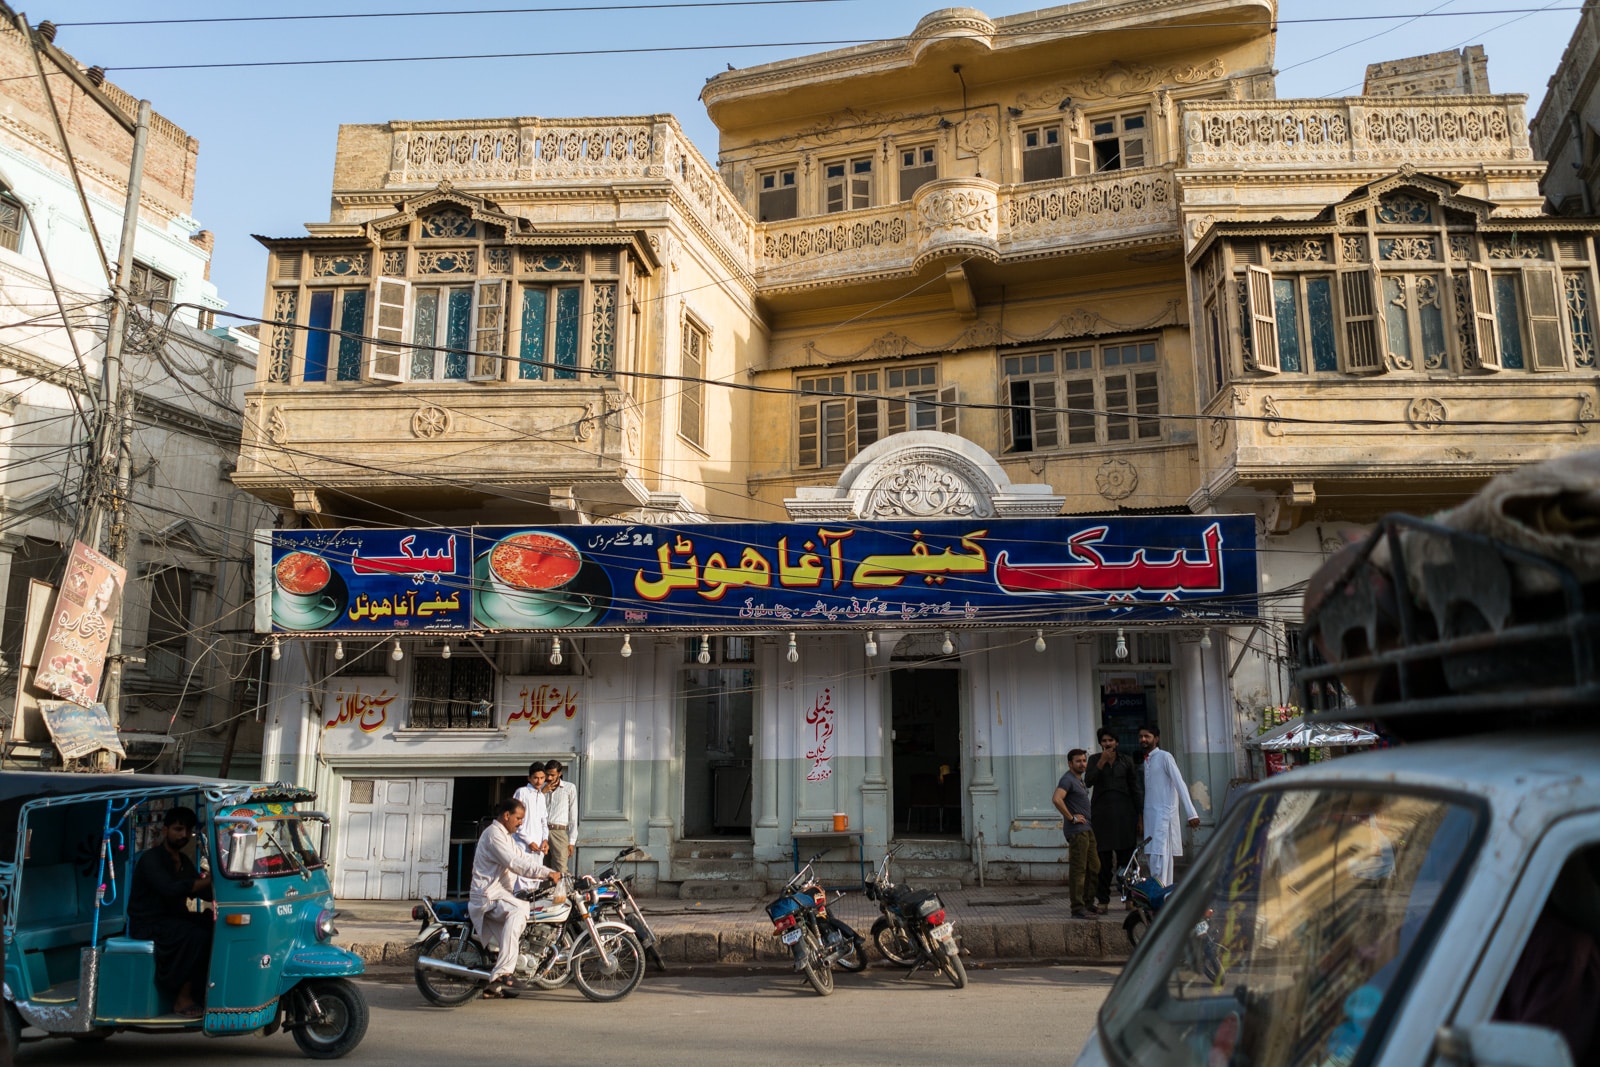 Sindh travel guide - The streets of Hyderabad, Pakistan - Lost With Purpose travel blog